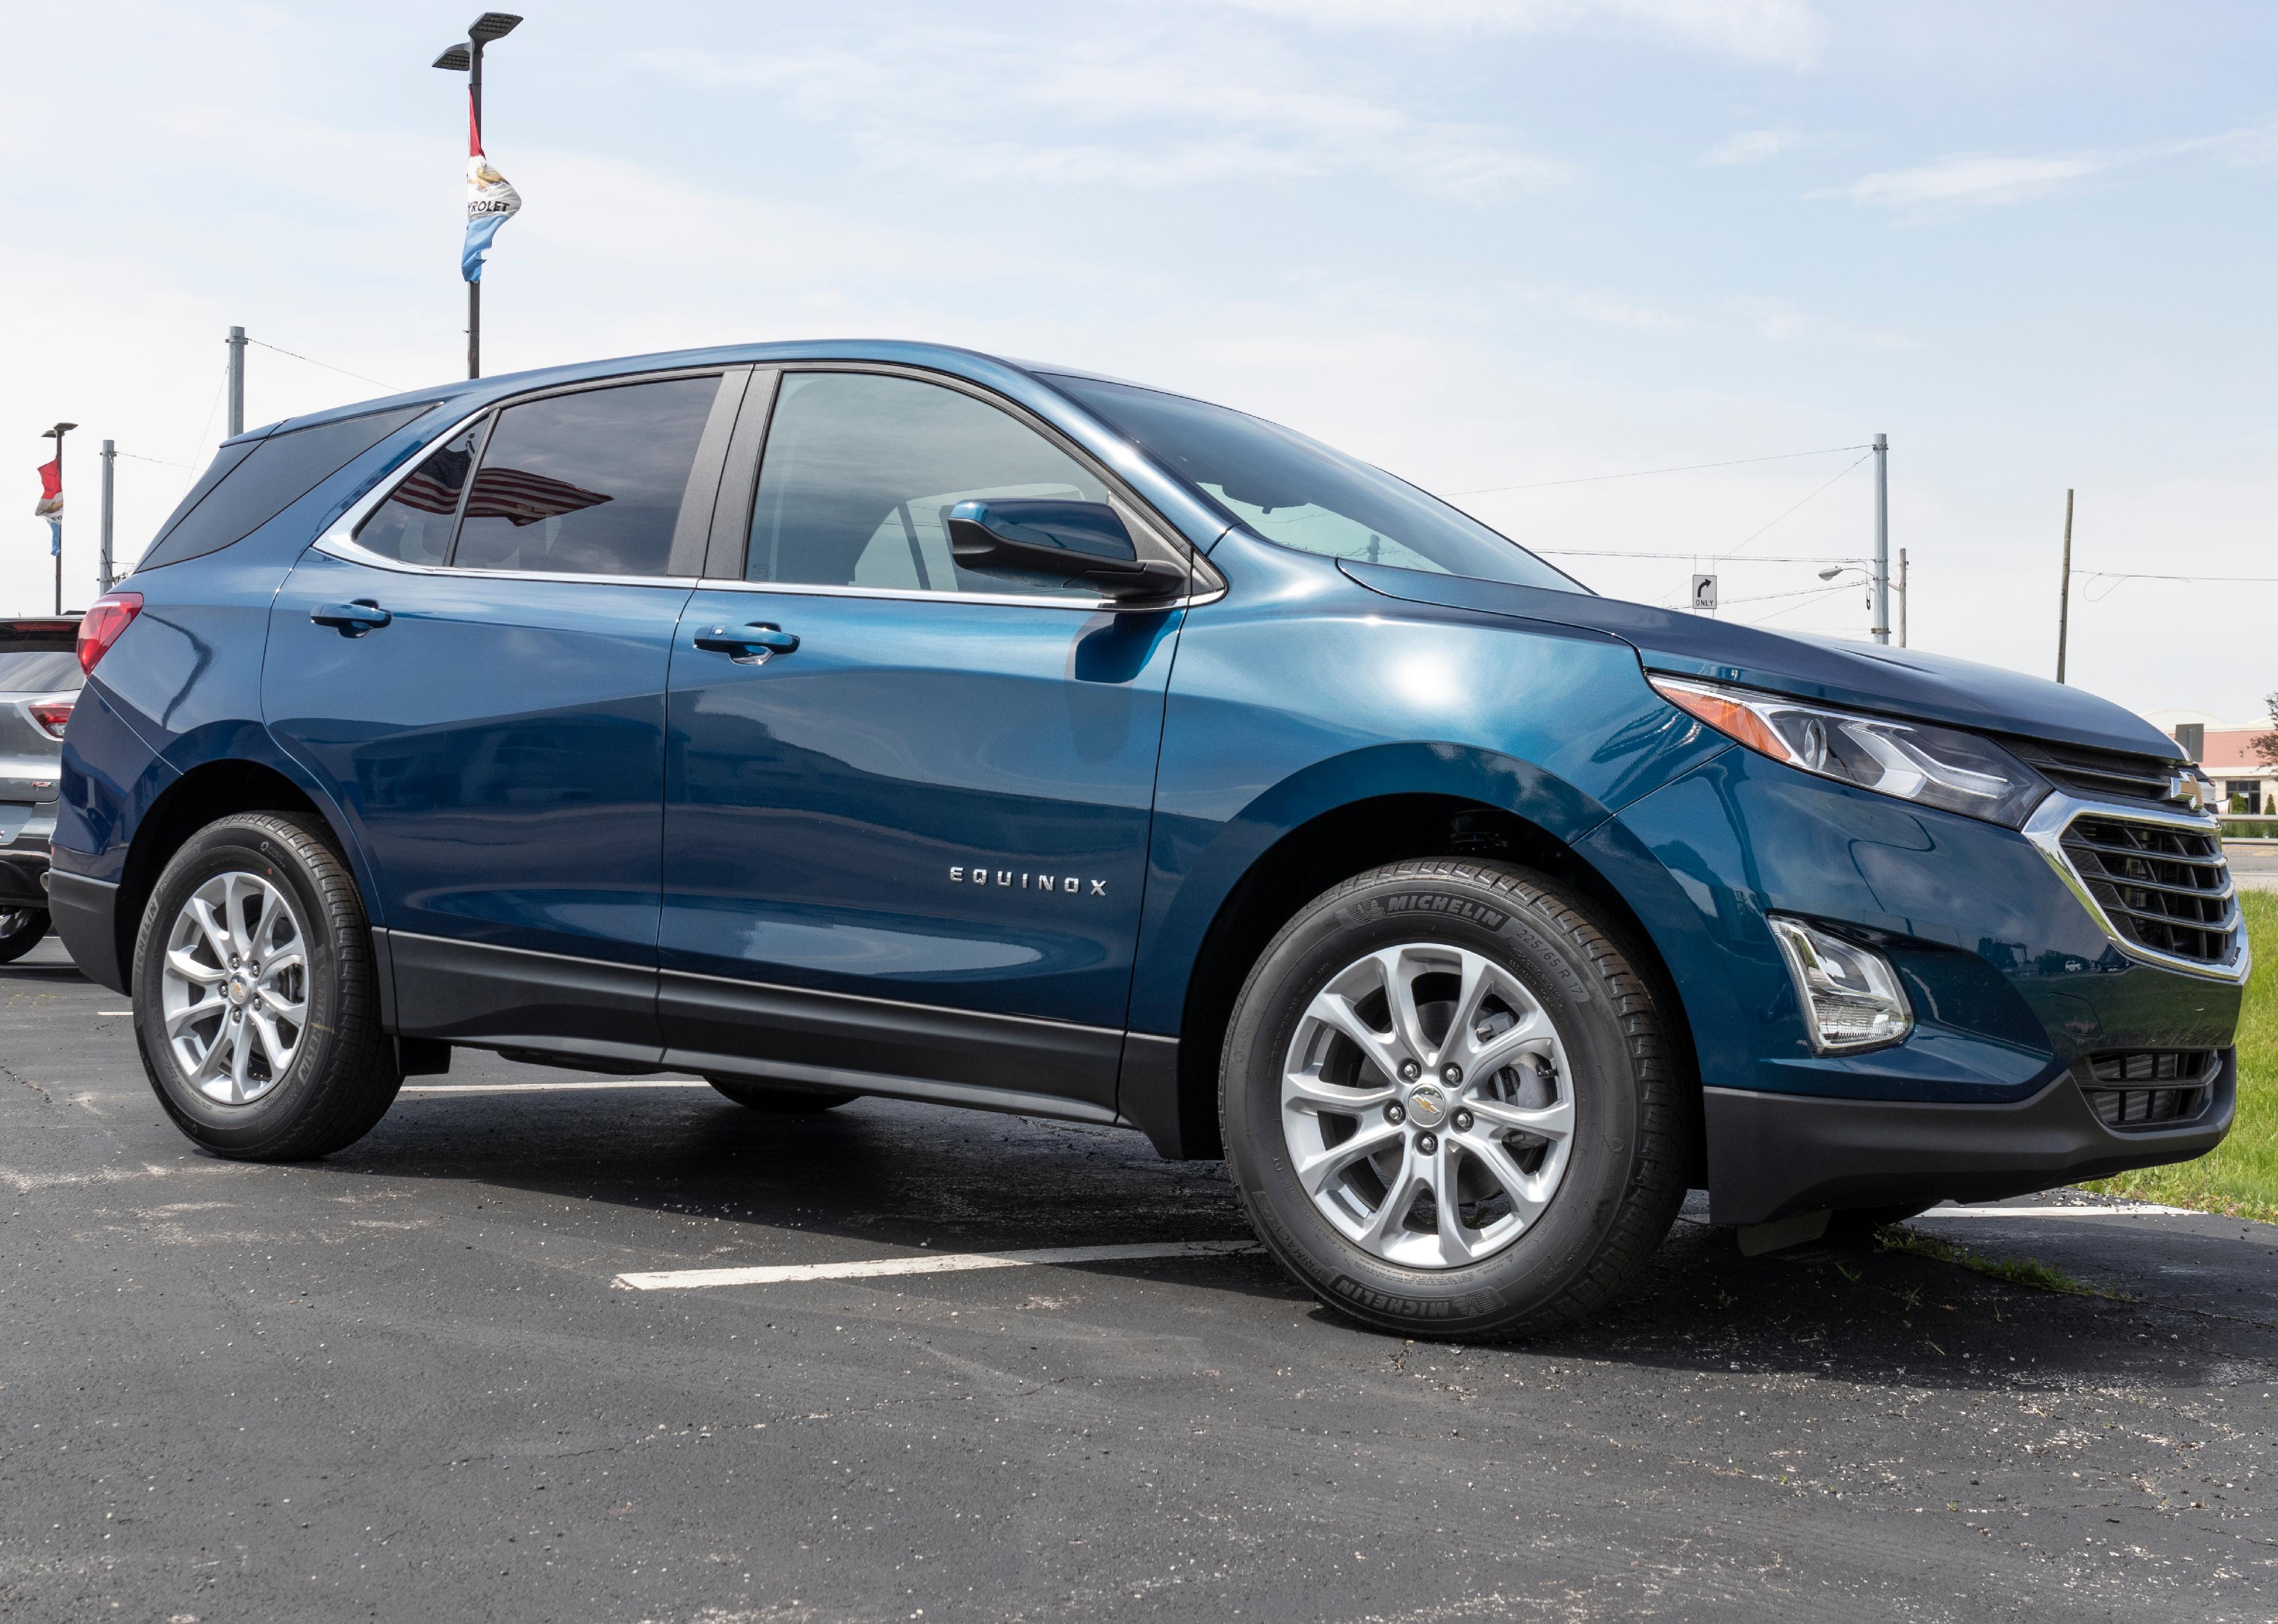 Chevrolet Equinox SUV on display in parking lot.